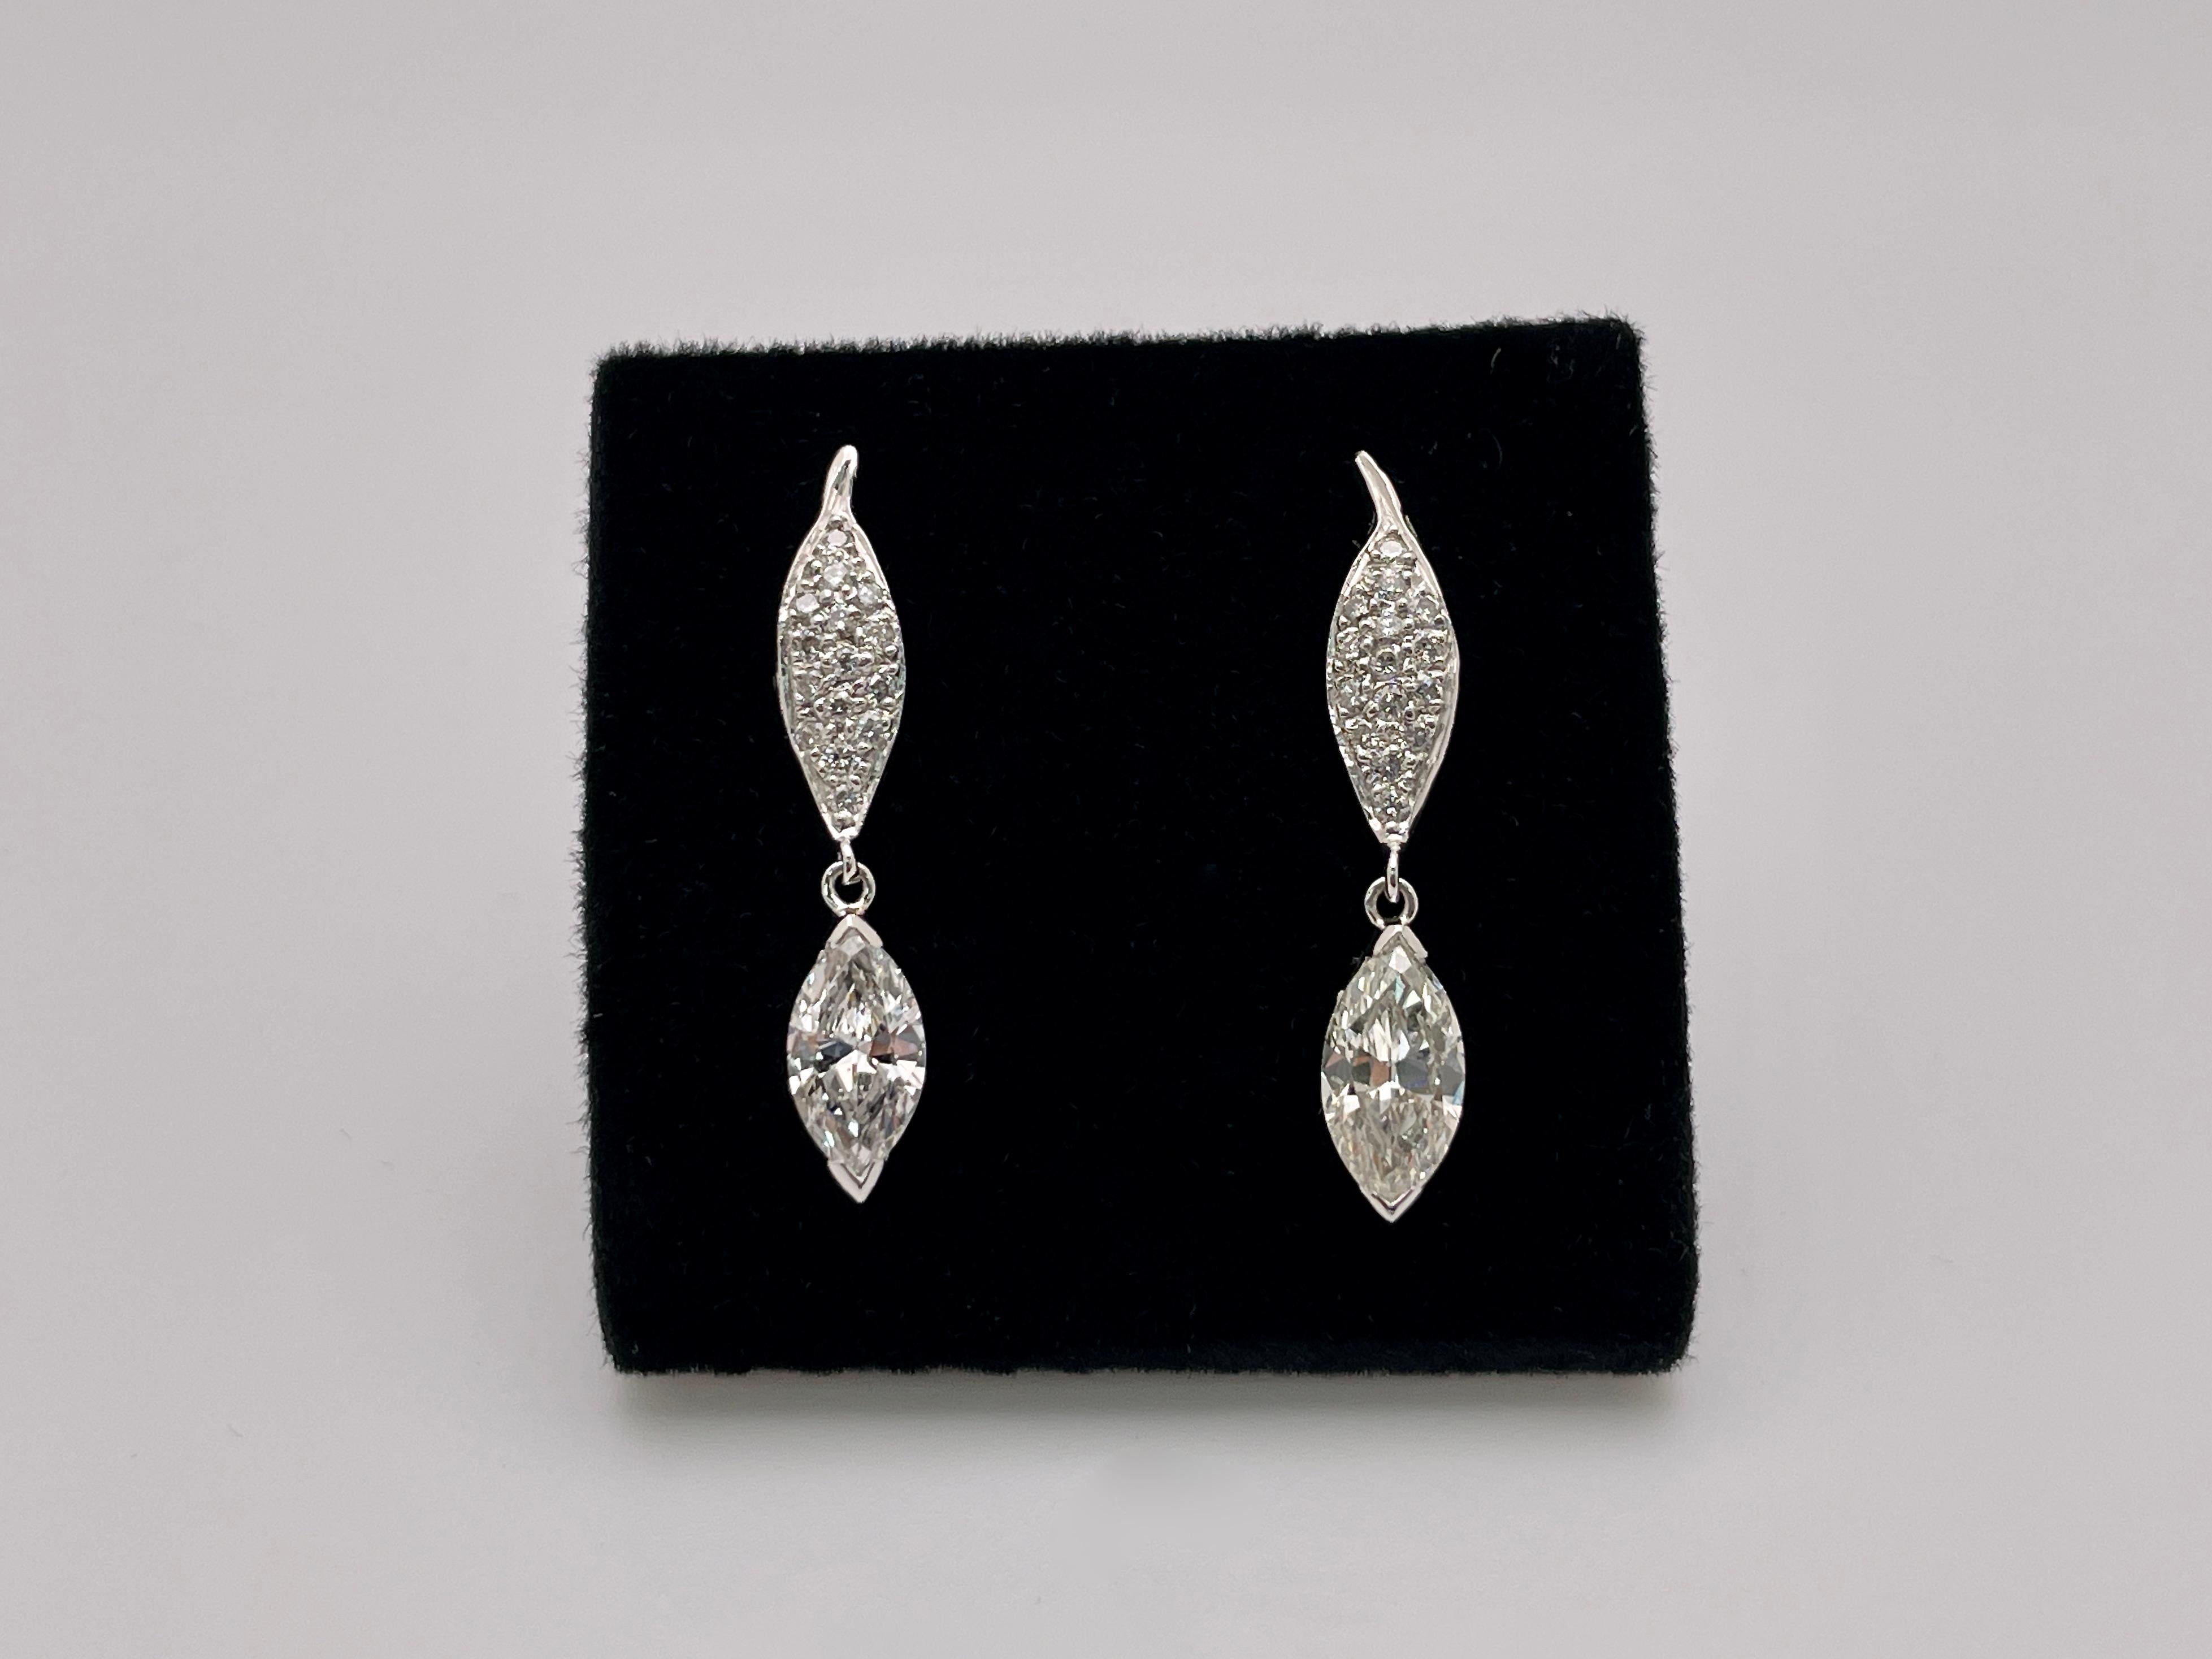 An original pair of platinum diamond drop dangle earrings. Each mounted with a marquise cut diamond weighing approximately 0.90 CT, one I color SI1 clarity, and the other J color SI1 clarity. Each accented with 14 small round cut diamonds in a